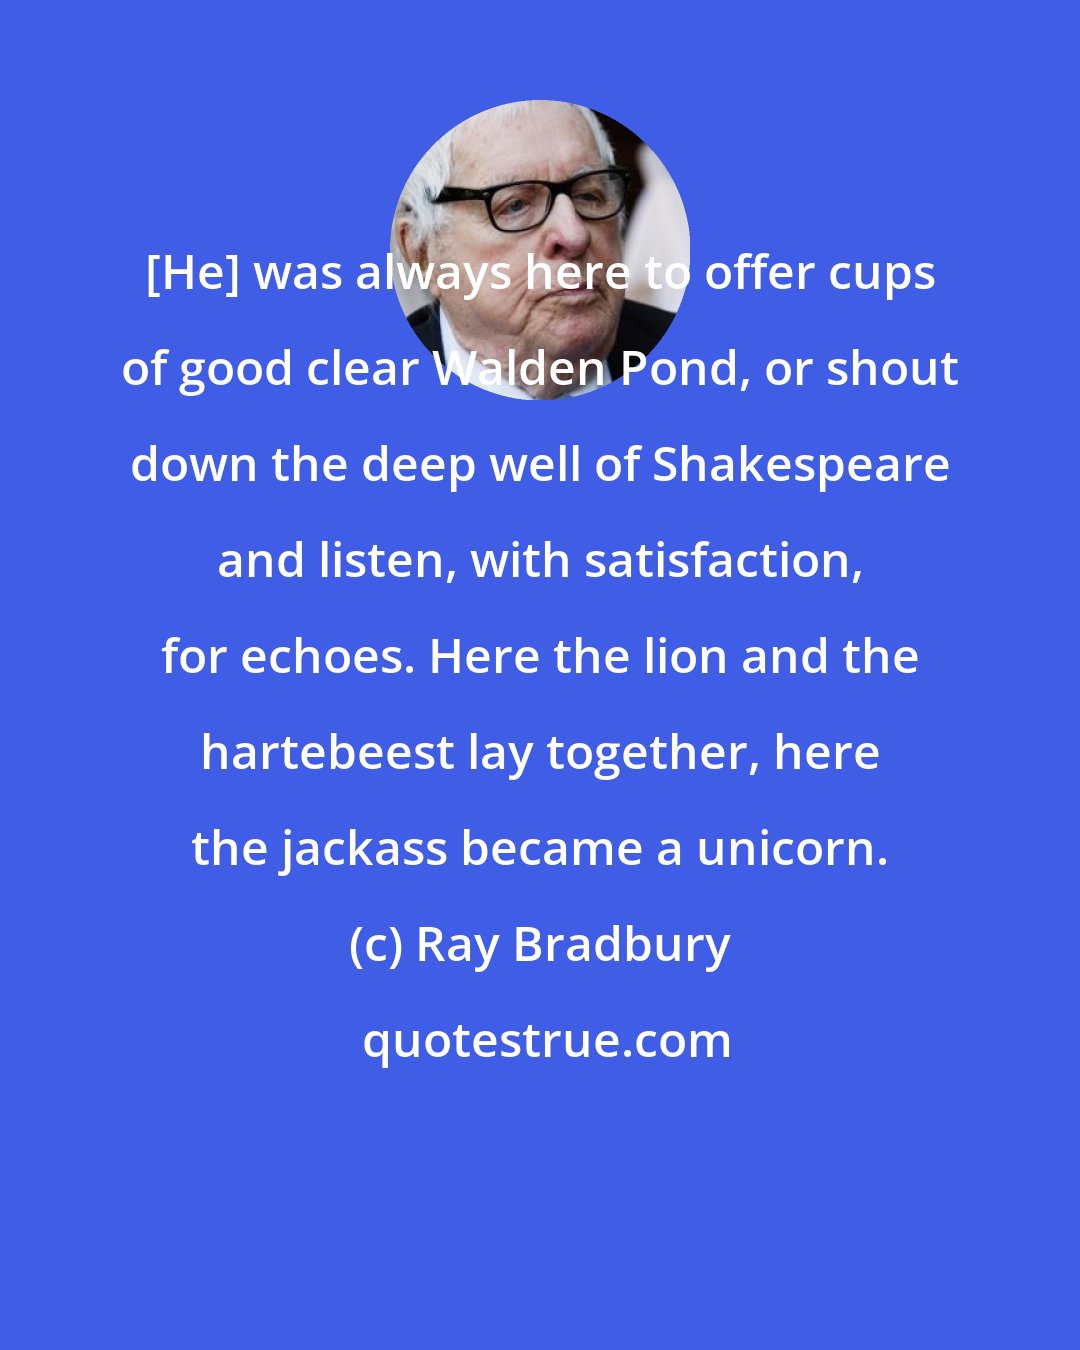 Ray Bradbury: [He] was always here to offer cups of good clear Walden Pond, or shout down the deep well of Shakespeare and listen, with satisfaction, for echoes. Here the lion and the hartebeest lay together, here the jackass became a unicorn.